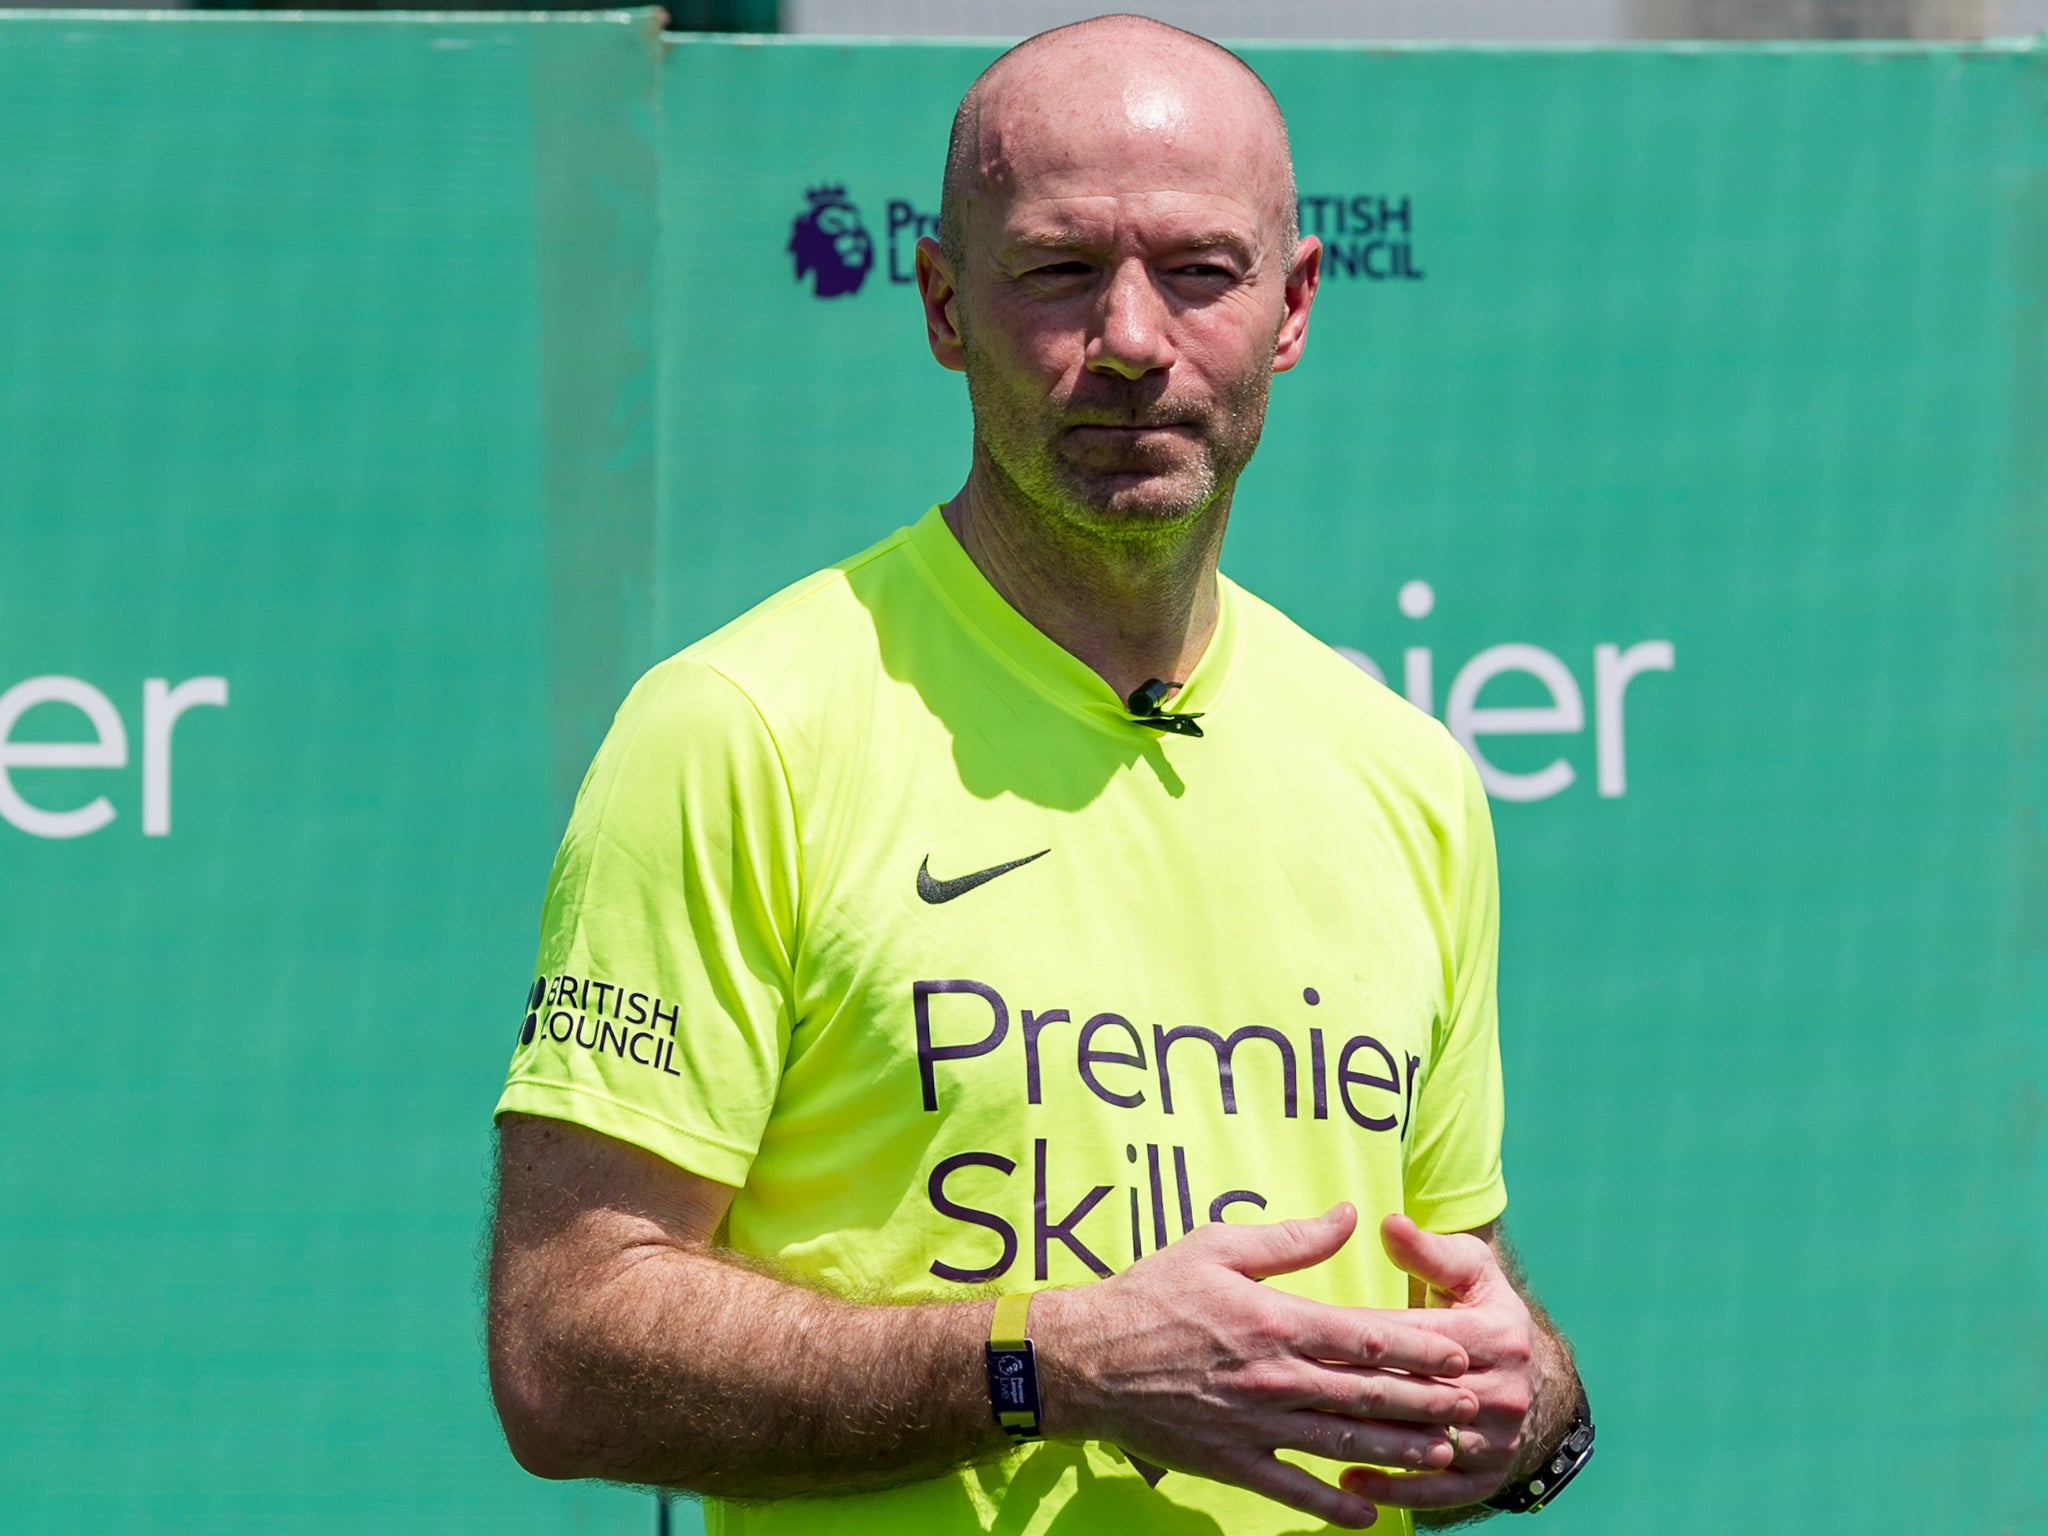 Alan Shearer fears he could suffer from dementia in the future due to the affects of heading a football